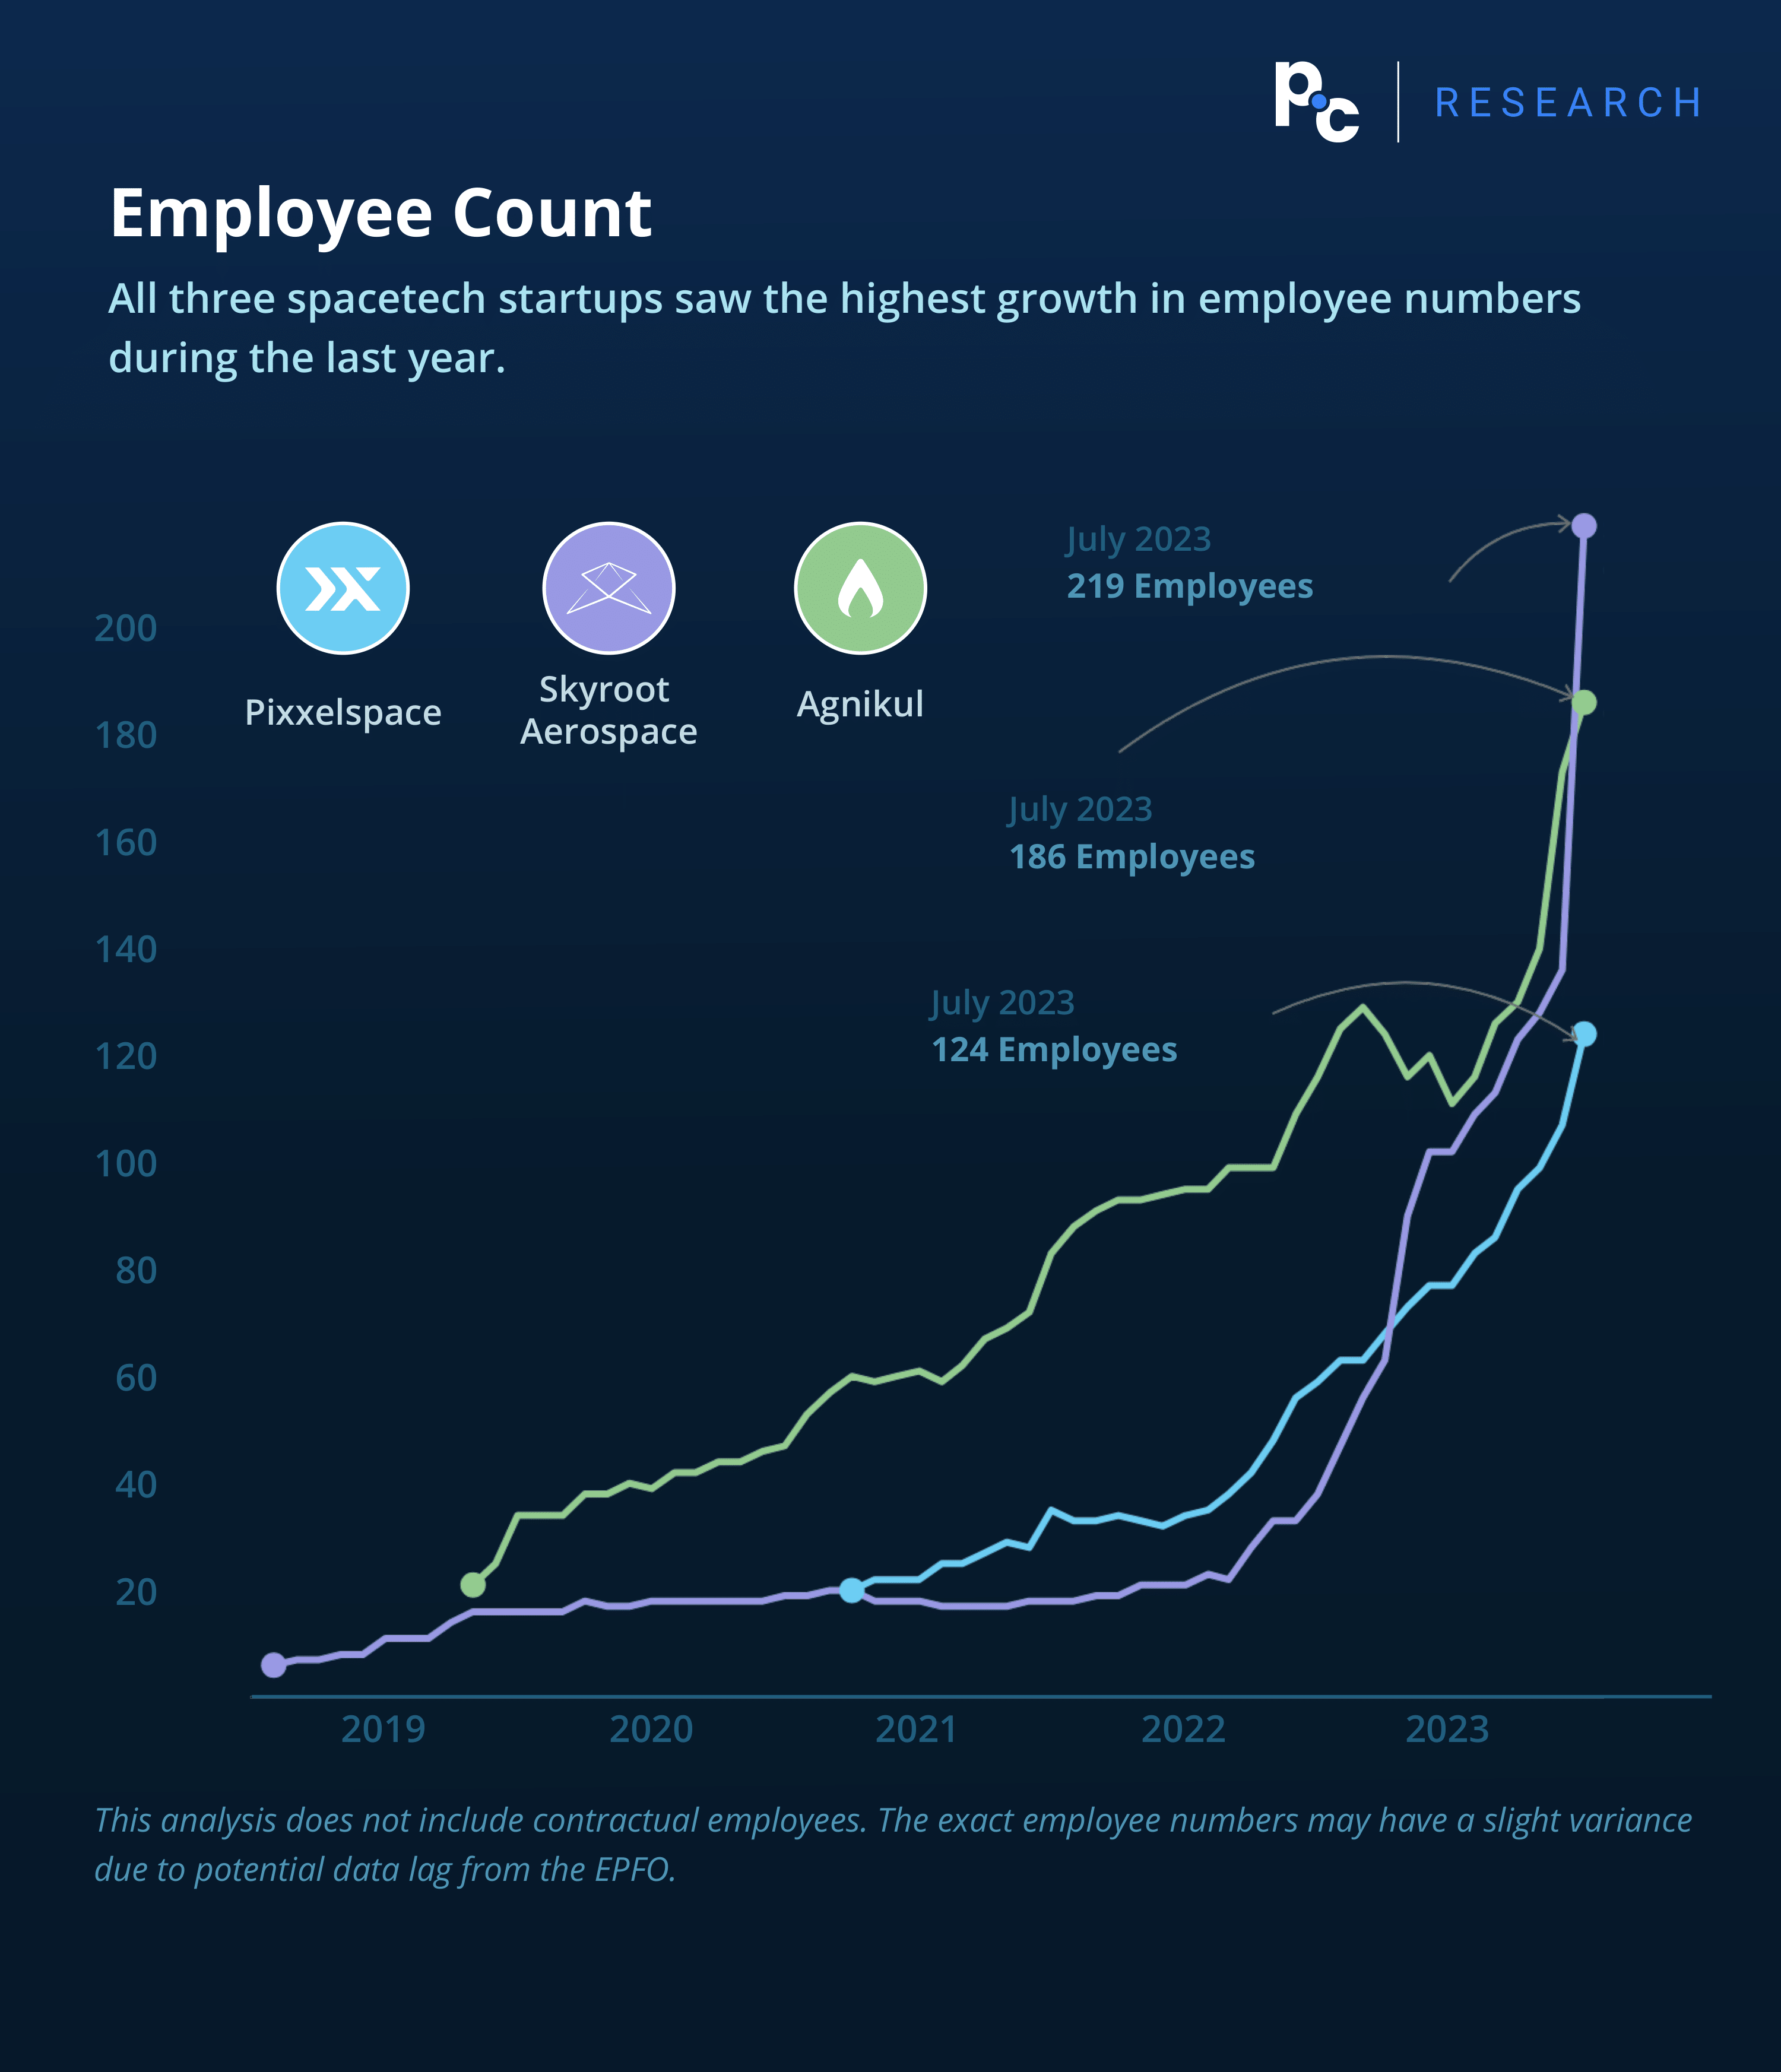 Pixxelspace vs Skyroot Aerospace vs Agnikul 2023: Employee Count.

All three spacetech startups saw the highest growth in employee numbers during the last year.

This analysis does not include contractual employees. The exact employee numbers may have a slight variance due to potential data lag from the EPFO.